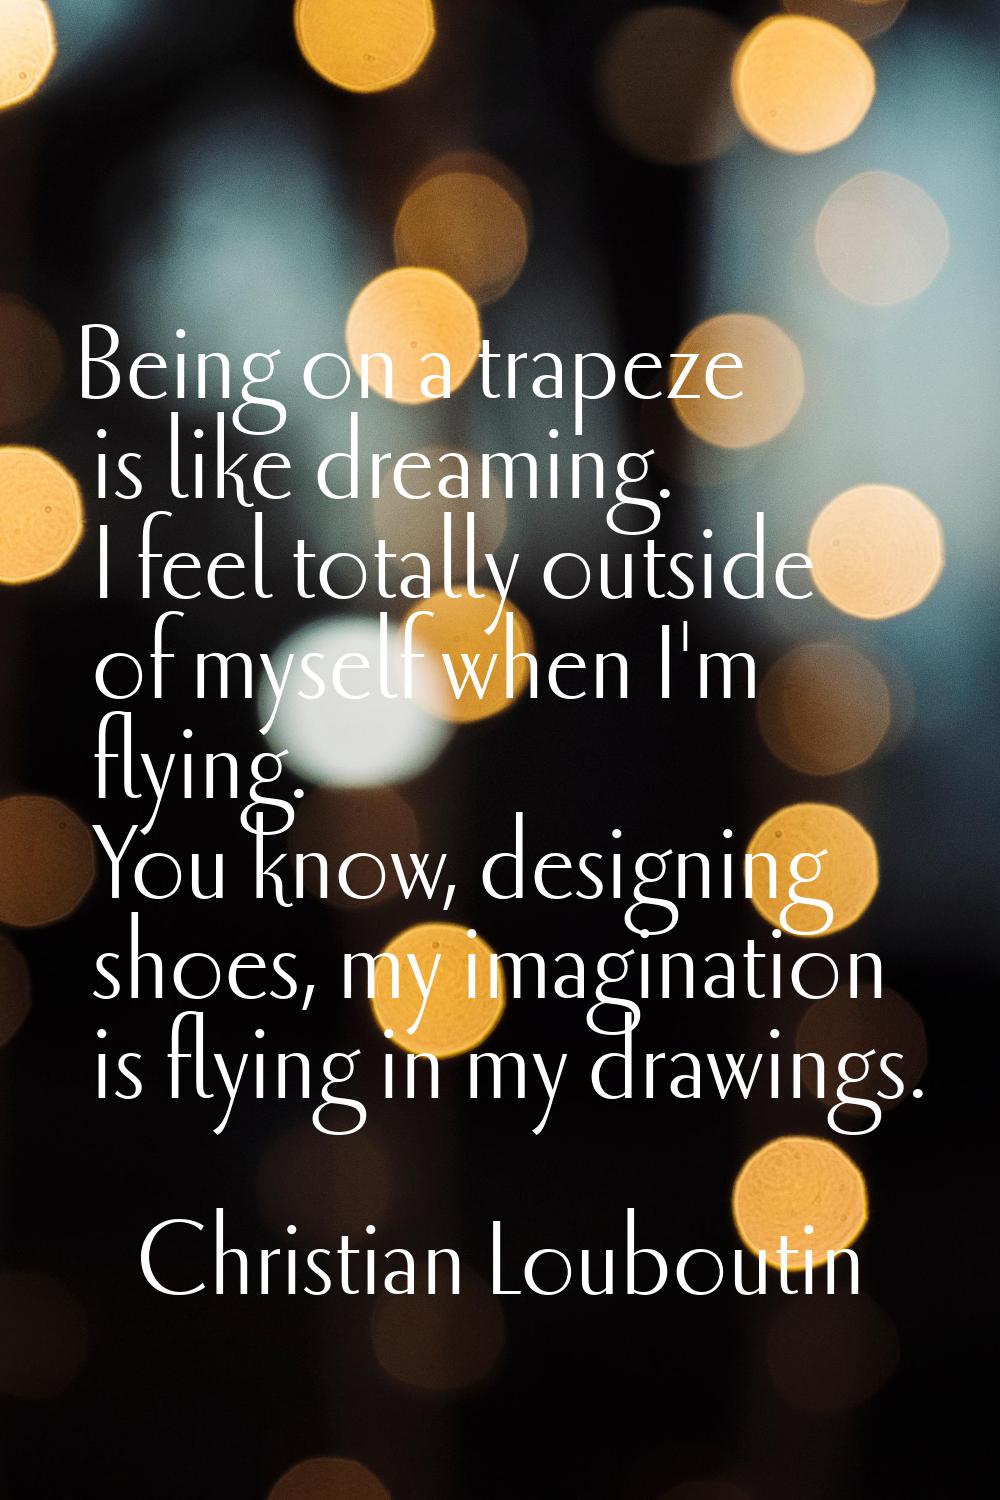 Being on a trapeze is like dreaming. I feel totally outside of myself when I'm flying. You know, de